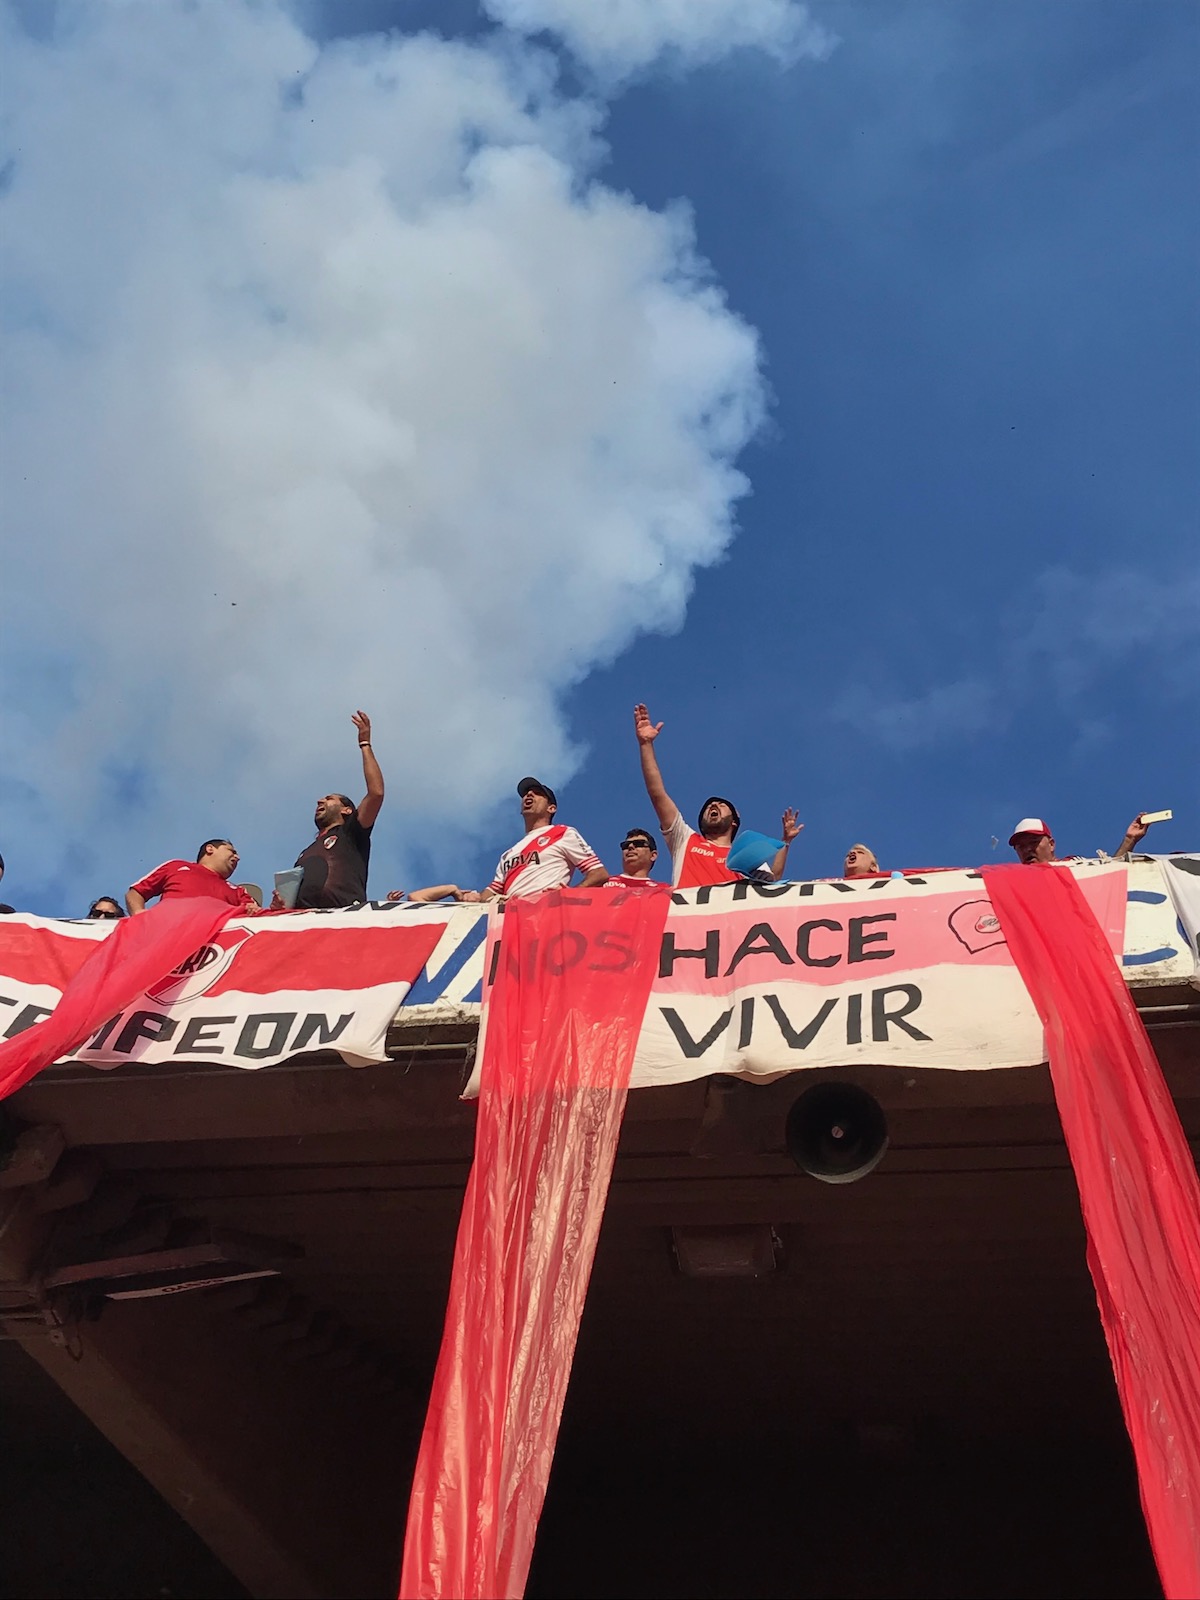 Football fans chant from the high terrace in Buenos Aires, Argentina.